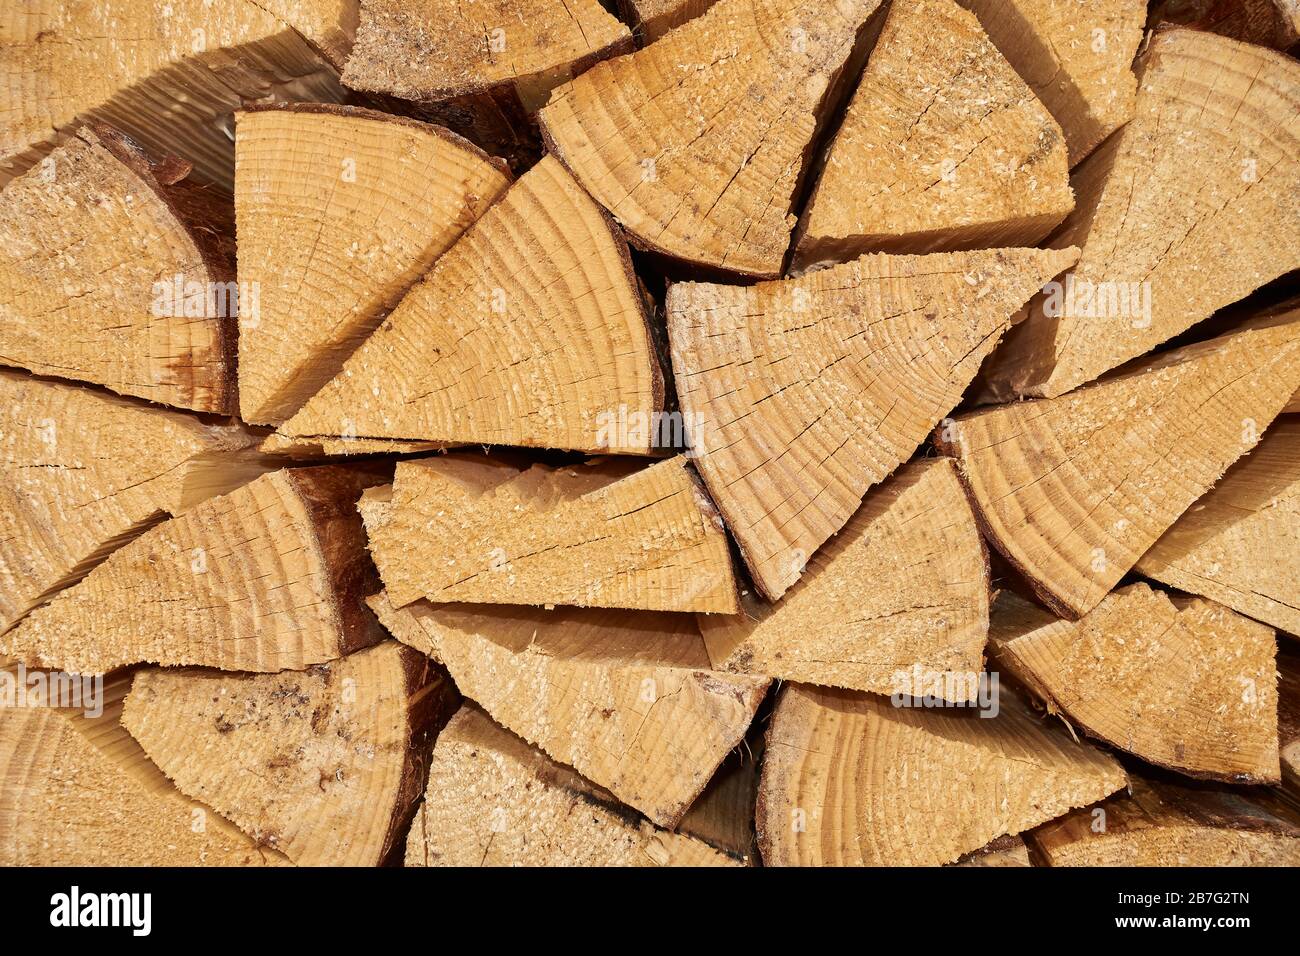 Background image of stacked, dry chopped logs used for firewood. Pile of logs ready to be used in fireplace. Alternative warming method. Stock Photo